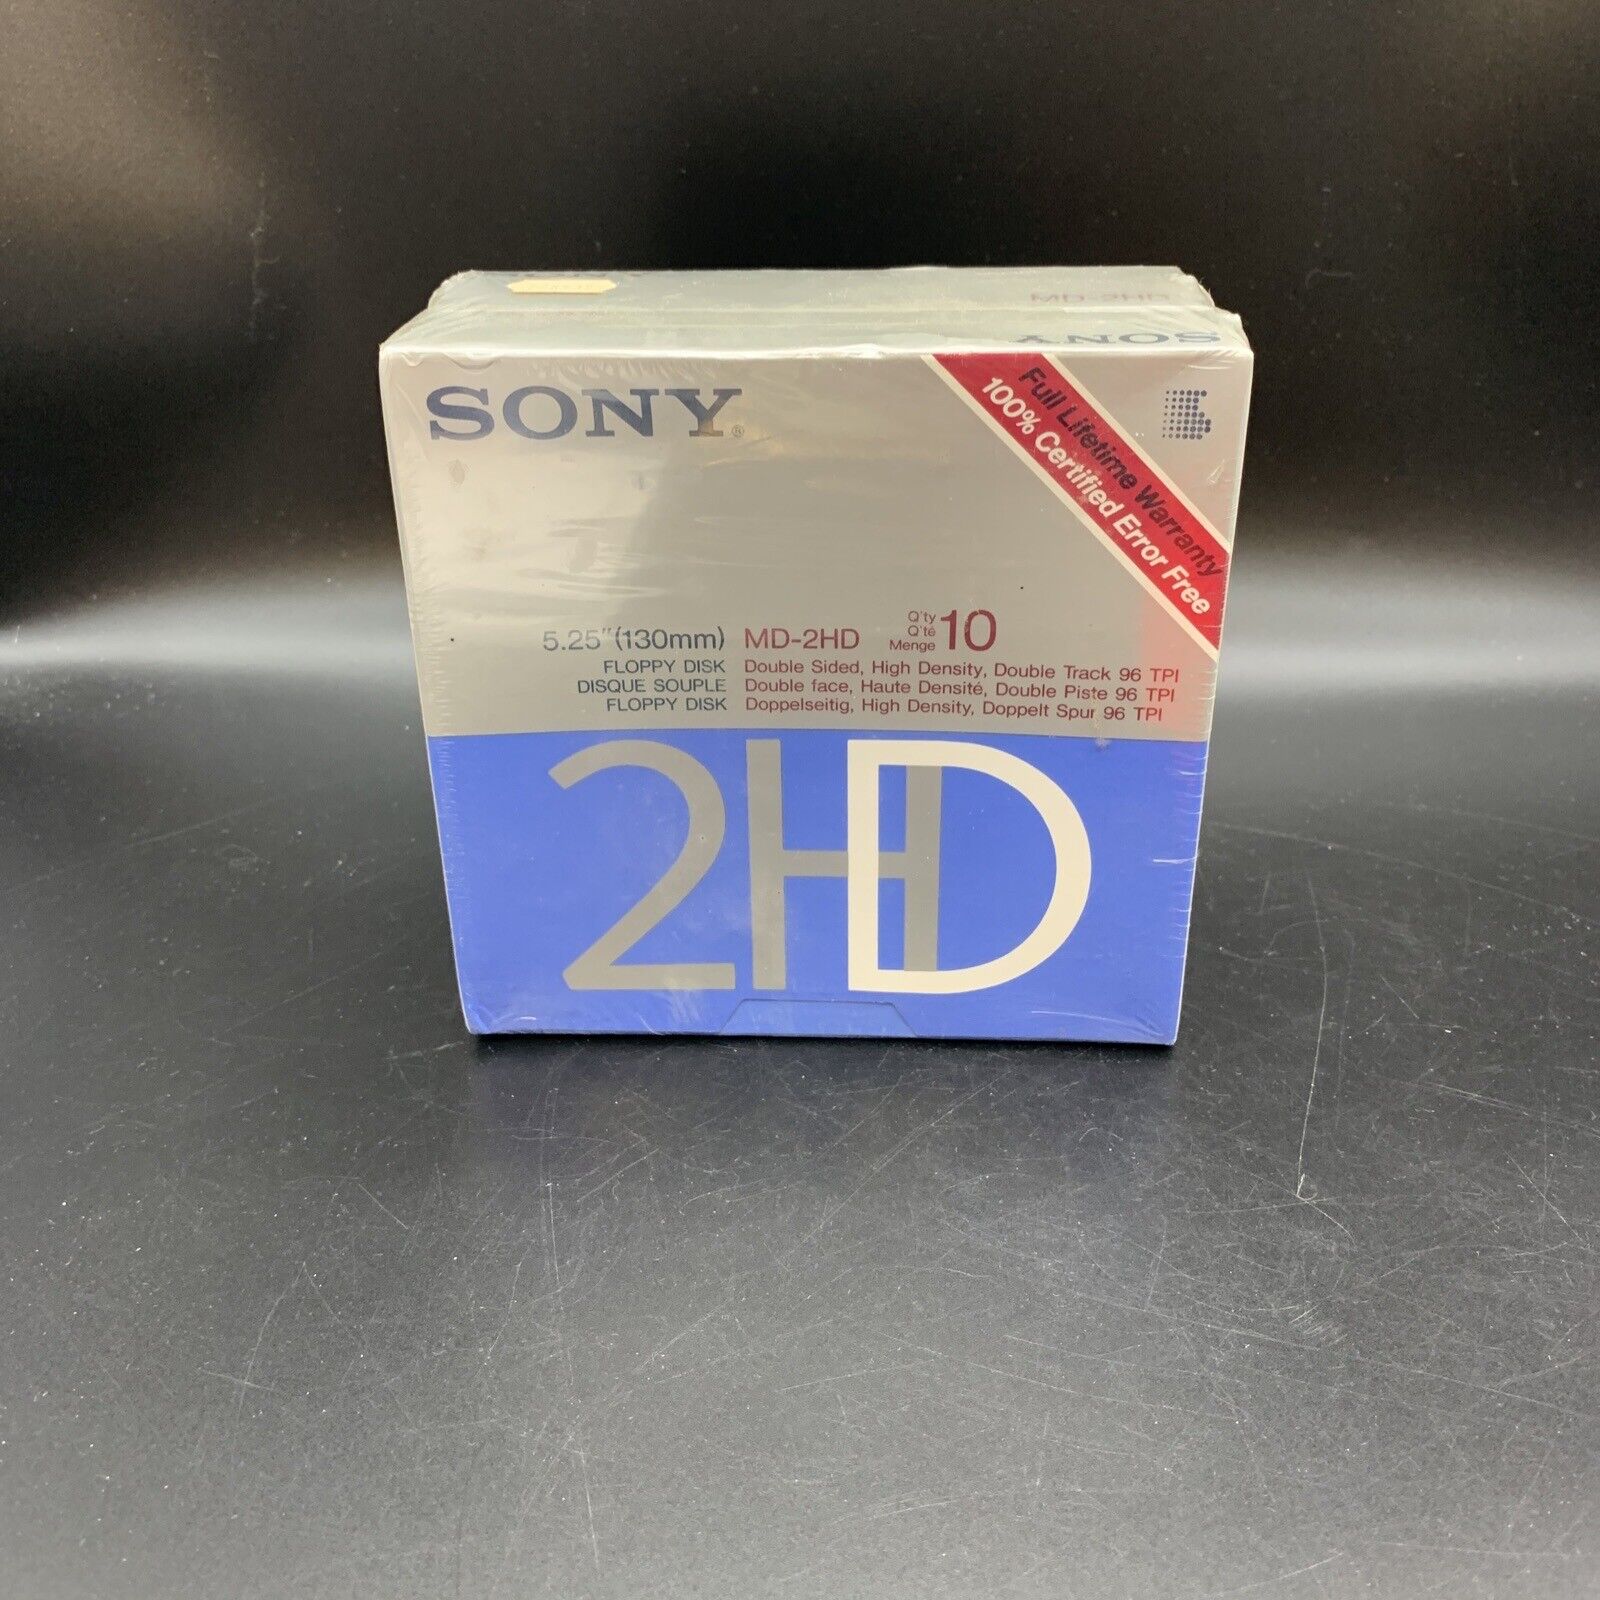 Sony 2HD 5.25” Floppy Disk Double Sides High Density Double Track 96 TPI Vintage